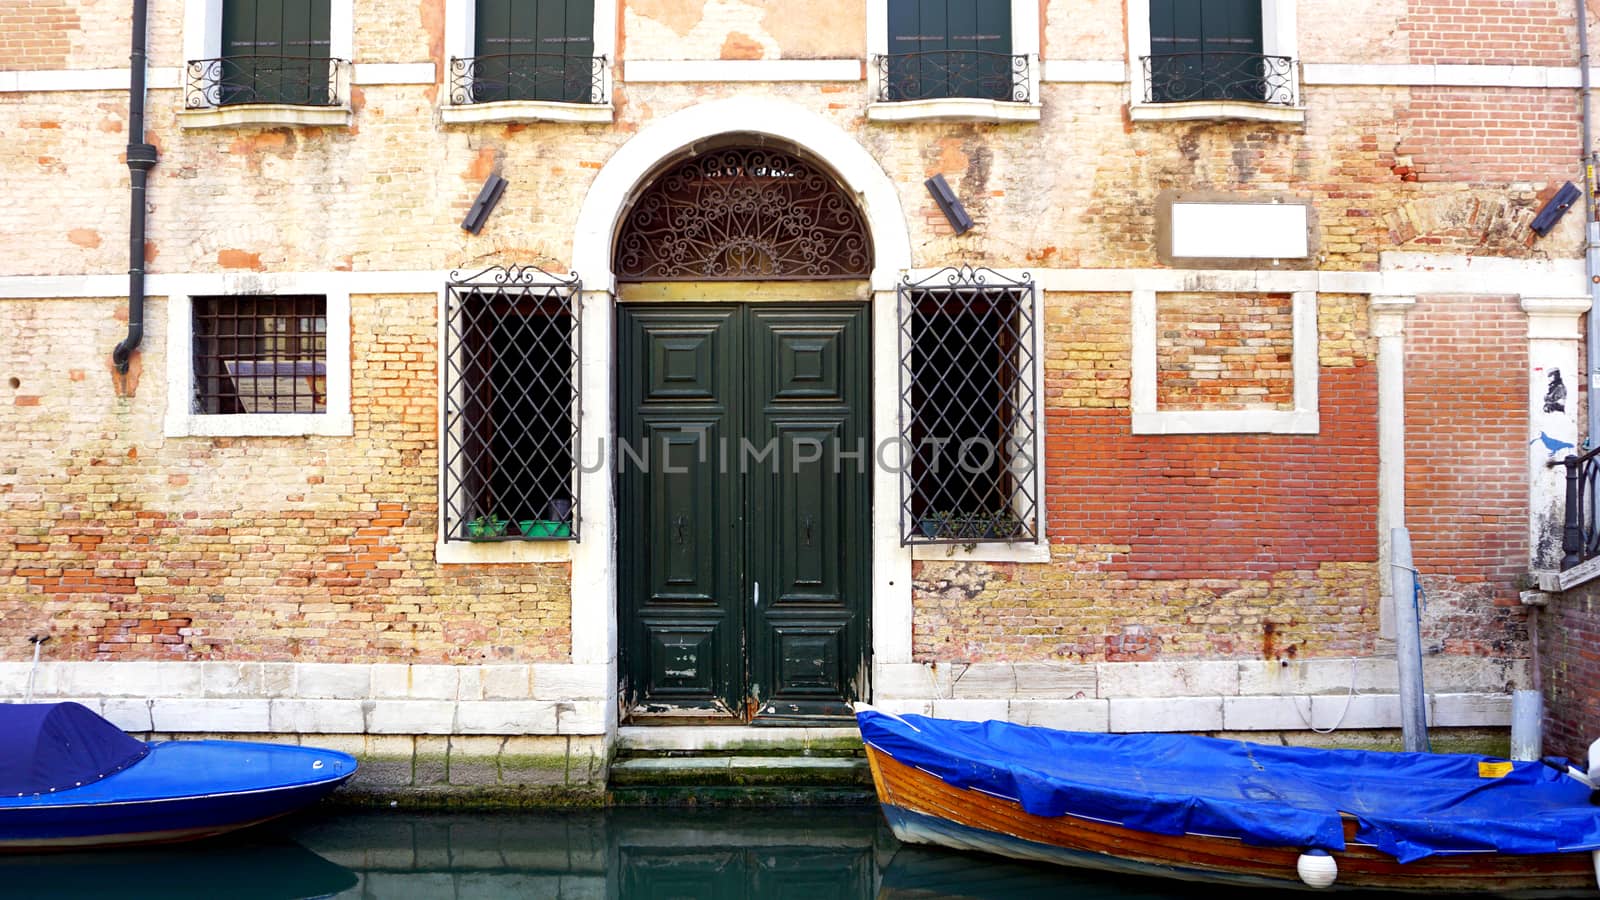 canal and boats with ancient brick wall  by polarbearstudio